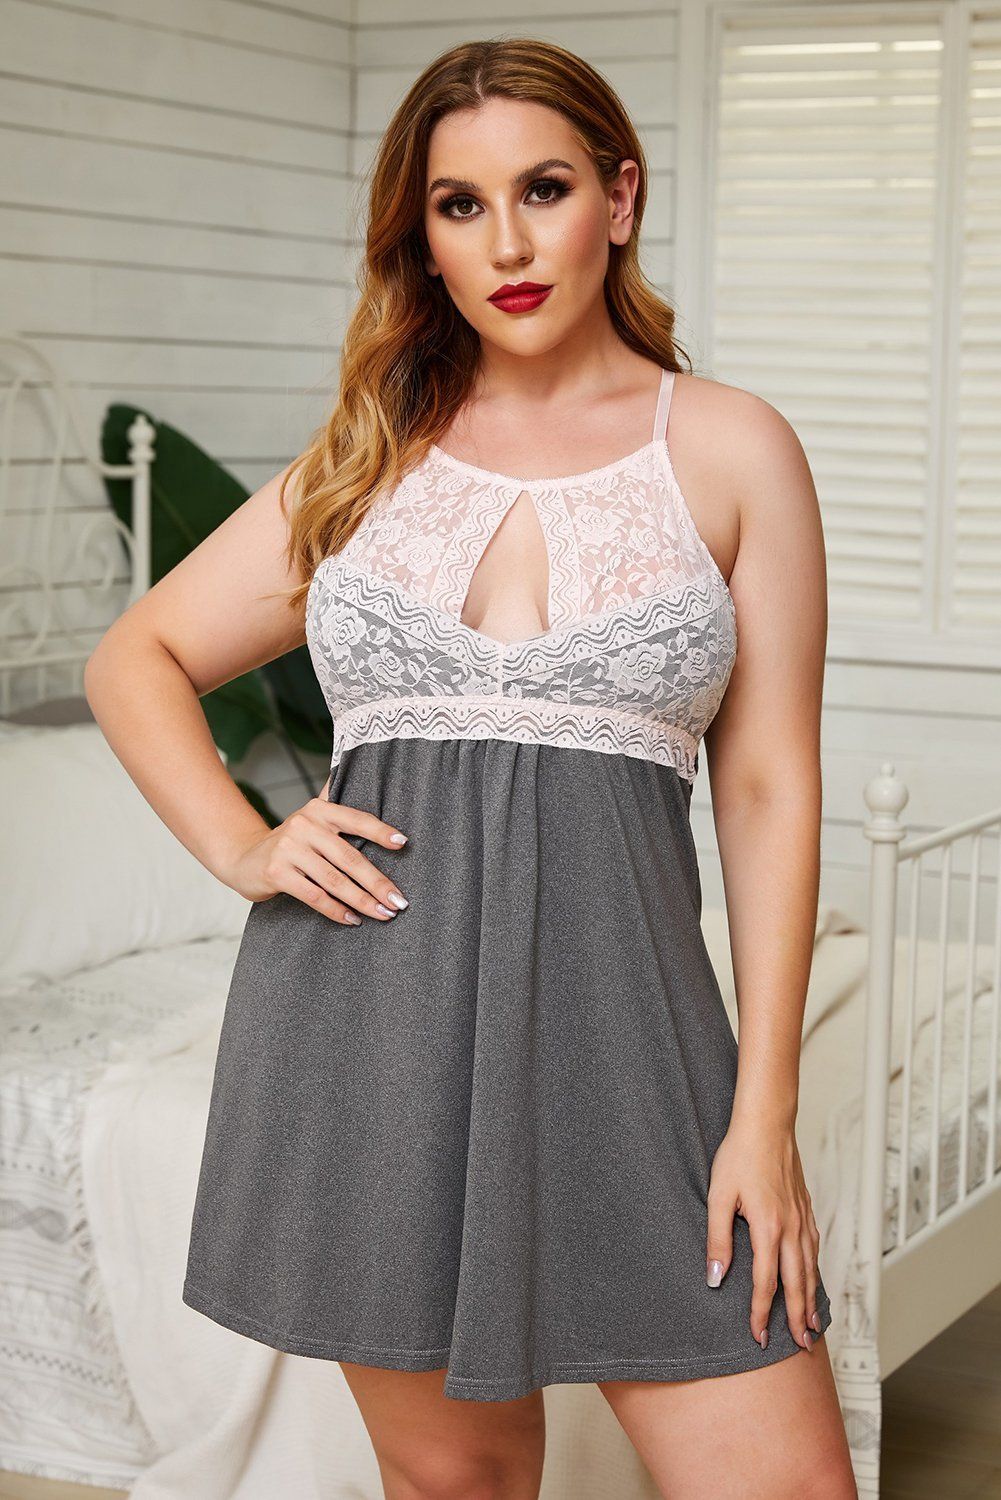 – Womens plus size babydoll with thong in a set
– Adjustable halter straps with o-ring connect on back
– Floral lace bust overlay with refined keyhole front
– Exclusive design for bedroom, cosplay, stage and so on
– Plus size lingerie great for your joyful romantic times

Size Chart (CM)
Sizes	Bust	Waist	Length
	Relax	Relax	Relax
1X	96	82	77
2X	103	89	79
3X	110	96	81
4X	117	103	83
5X	124	110	85
Elasticity	High

Note:
1.There maybe 1-2 cm deviation in different sizes, locations and stretch of fabrics. Size chart is for reference only, there may be a little difference with what you get.
2.There are 3 kinds of elasticity: High Elasticity (two-sided stretched), Medium Elasticity (one-sided stretched) and Nonelastic (can not stretched ).
3.Color may be lighter or darker due to the different PC display.
4.Wash it by hand in 30-degree water, hang to dry in shade, prohibit bleaching.
5.There maybe a slightly difference on detail and pattern of this dress.